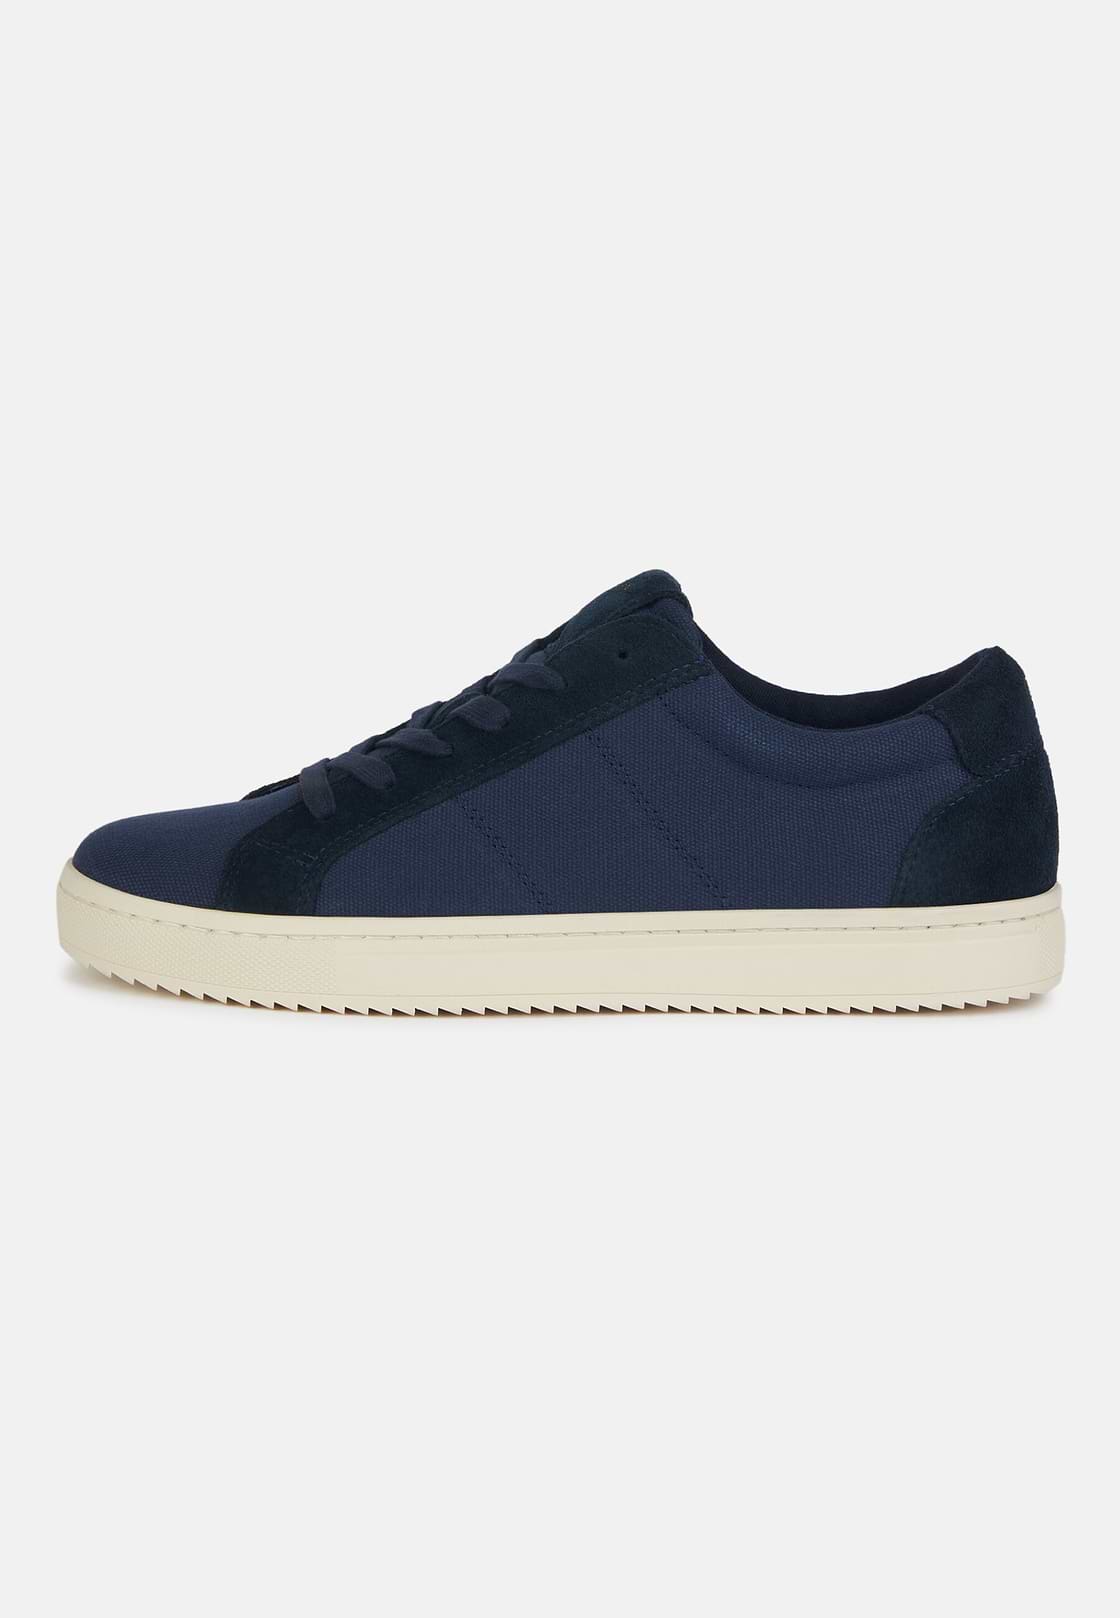 Canvas and Suede Navy Blue Trainers, Navy blue, hi-res